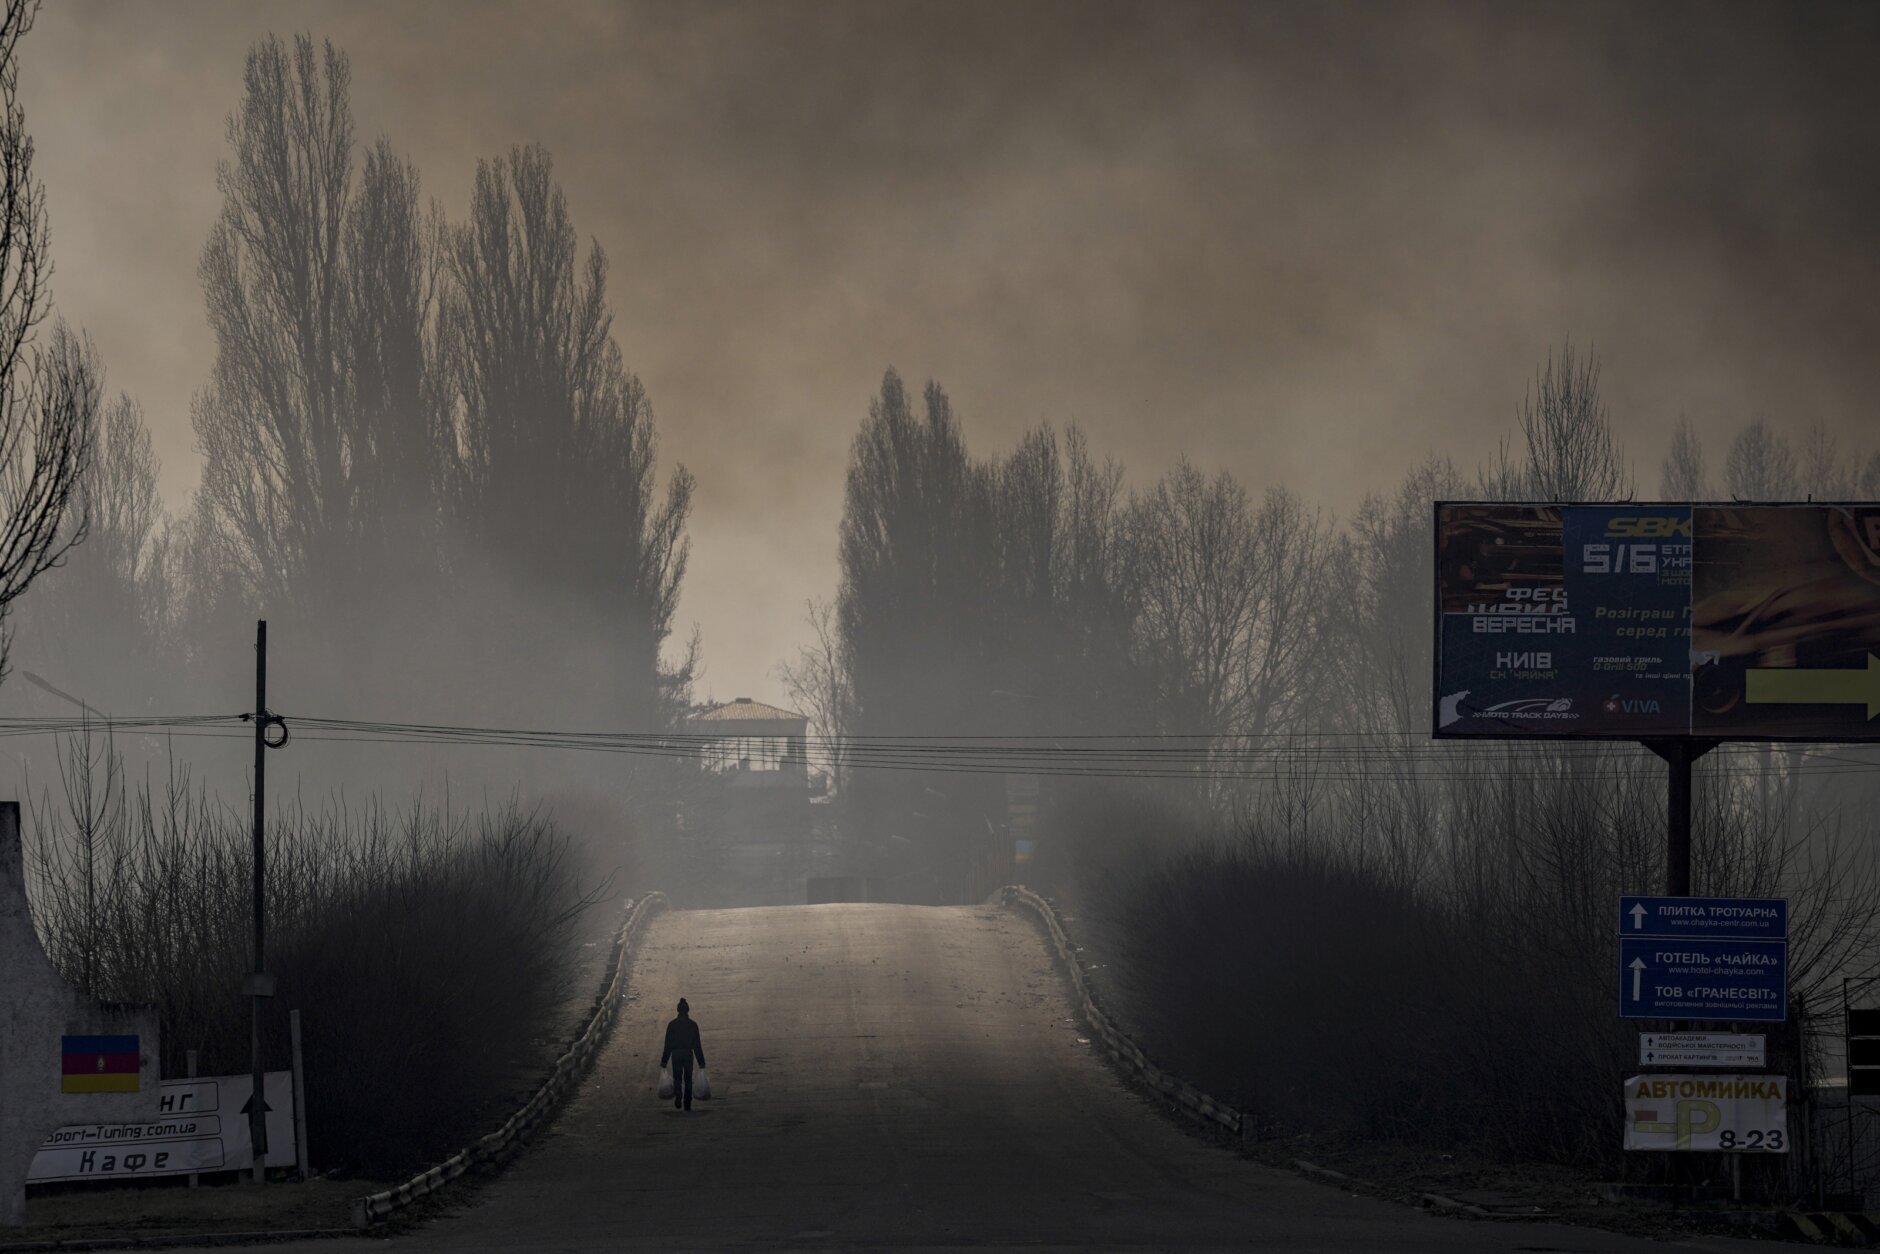 A man carries shopping bags as heavy smoke from a warehouse destroyed by Russian bombardment casts shadows on the road outside Kyiv, Ukraine,Thursday, March 24, 2022. (AP Photo/Vadim Ghirda)